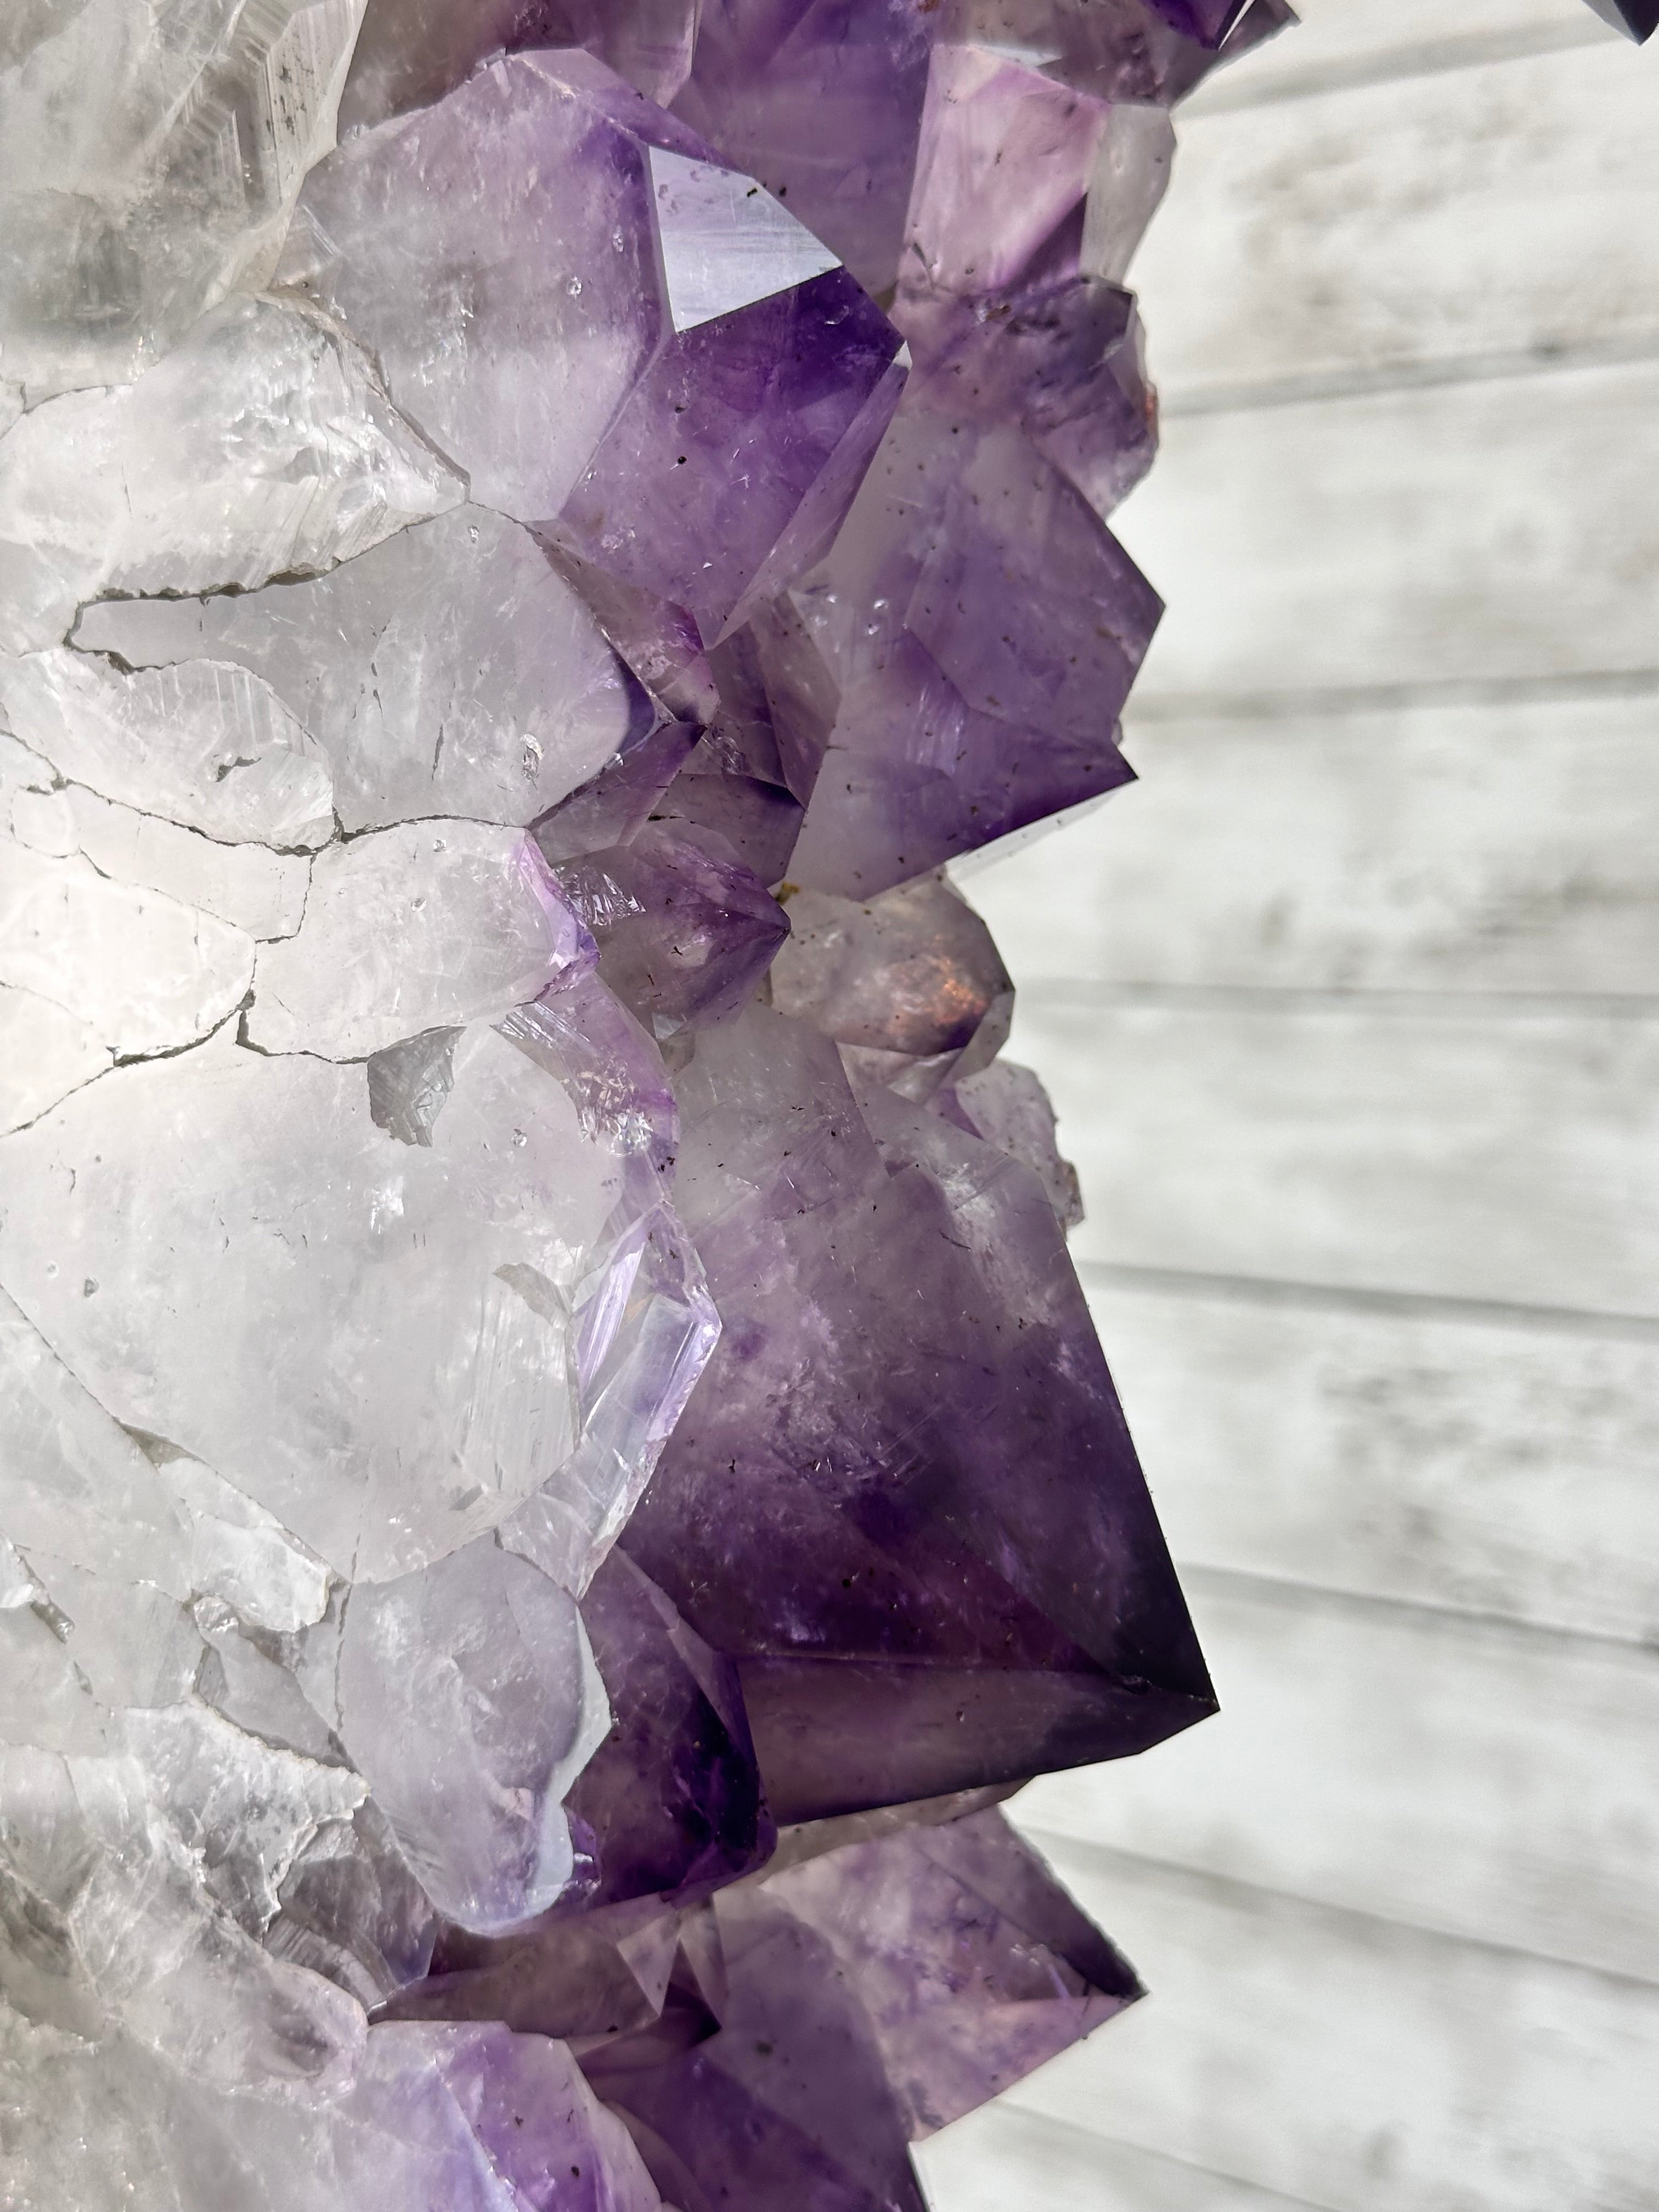 Super Quality Amethyst Portal, Rotating Stand, 170 lbs & 73" Tall #5604-0132 - Brazil GemsBrazil GemsSuper Quality Amethyst Portal, Rotating Stand, 170 lbs & 73" Tall #5604-0132Portals on Rotating Bases5604-0132